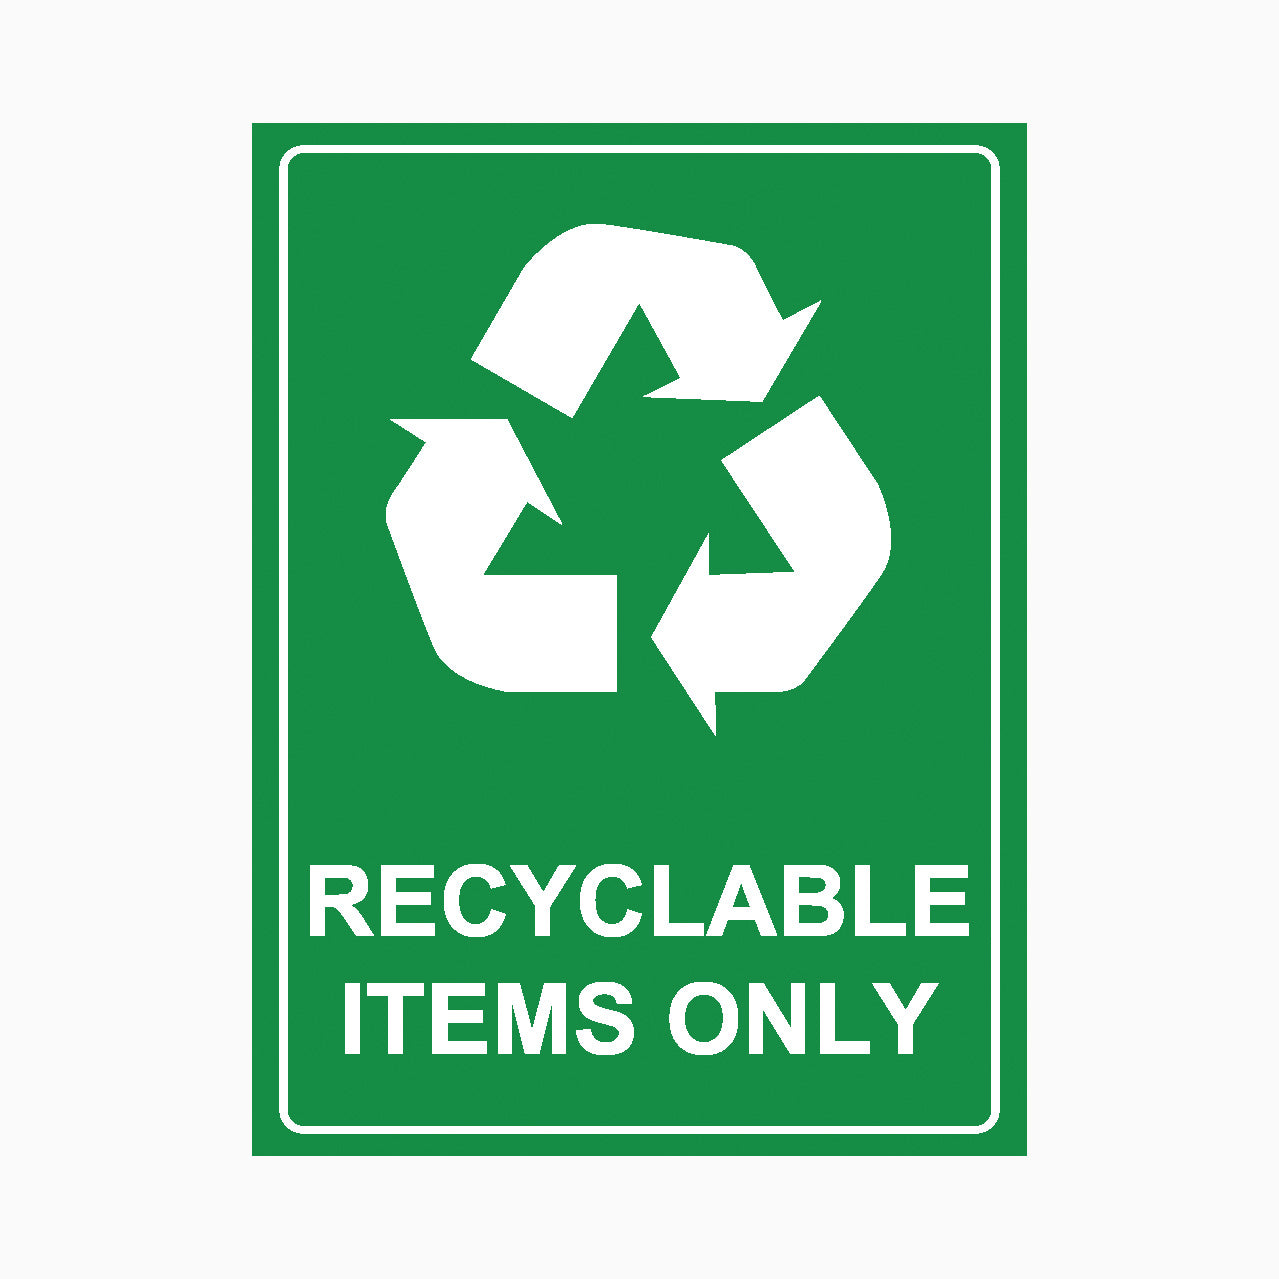 RECYCLABLE ITEMS ONLY